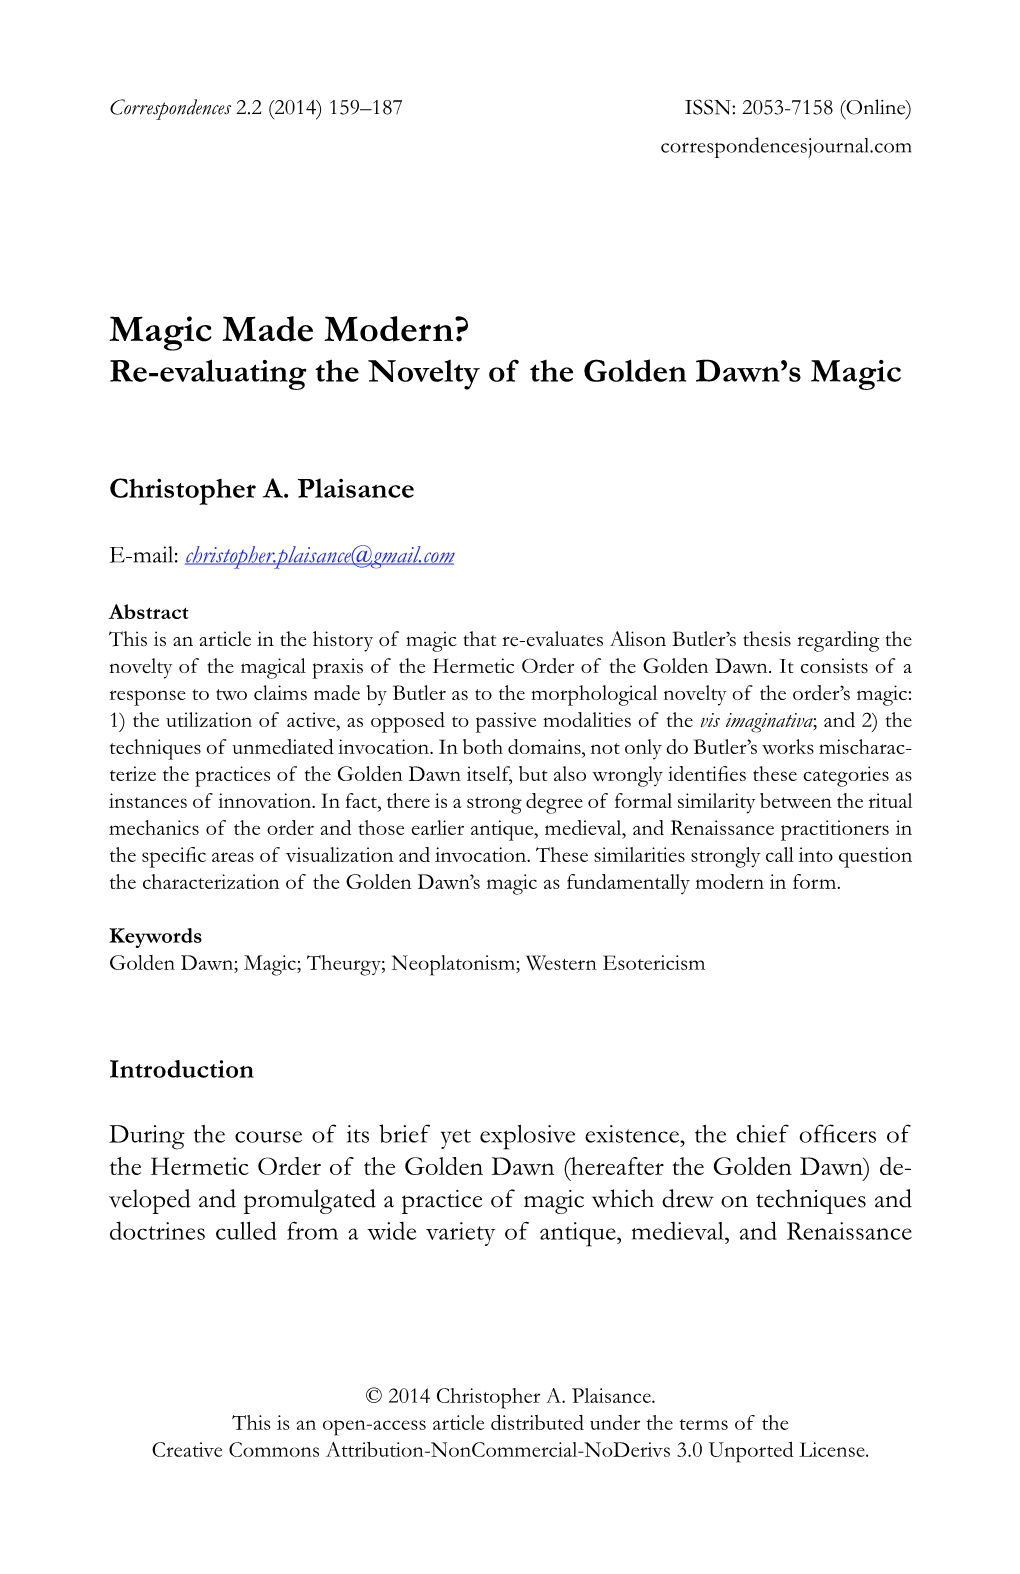 Magic Made Modern? Re-Evaluating the Novelty of the Golden Dawn's